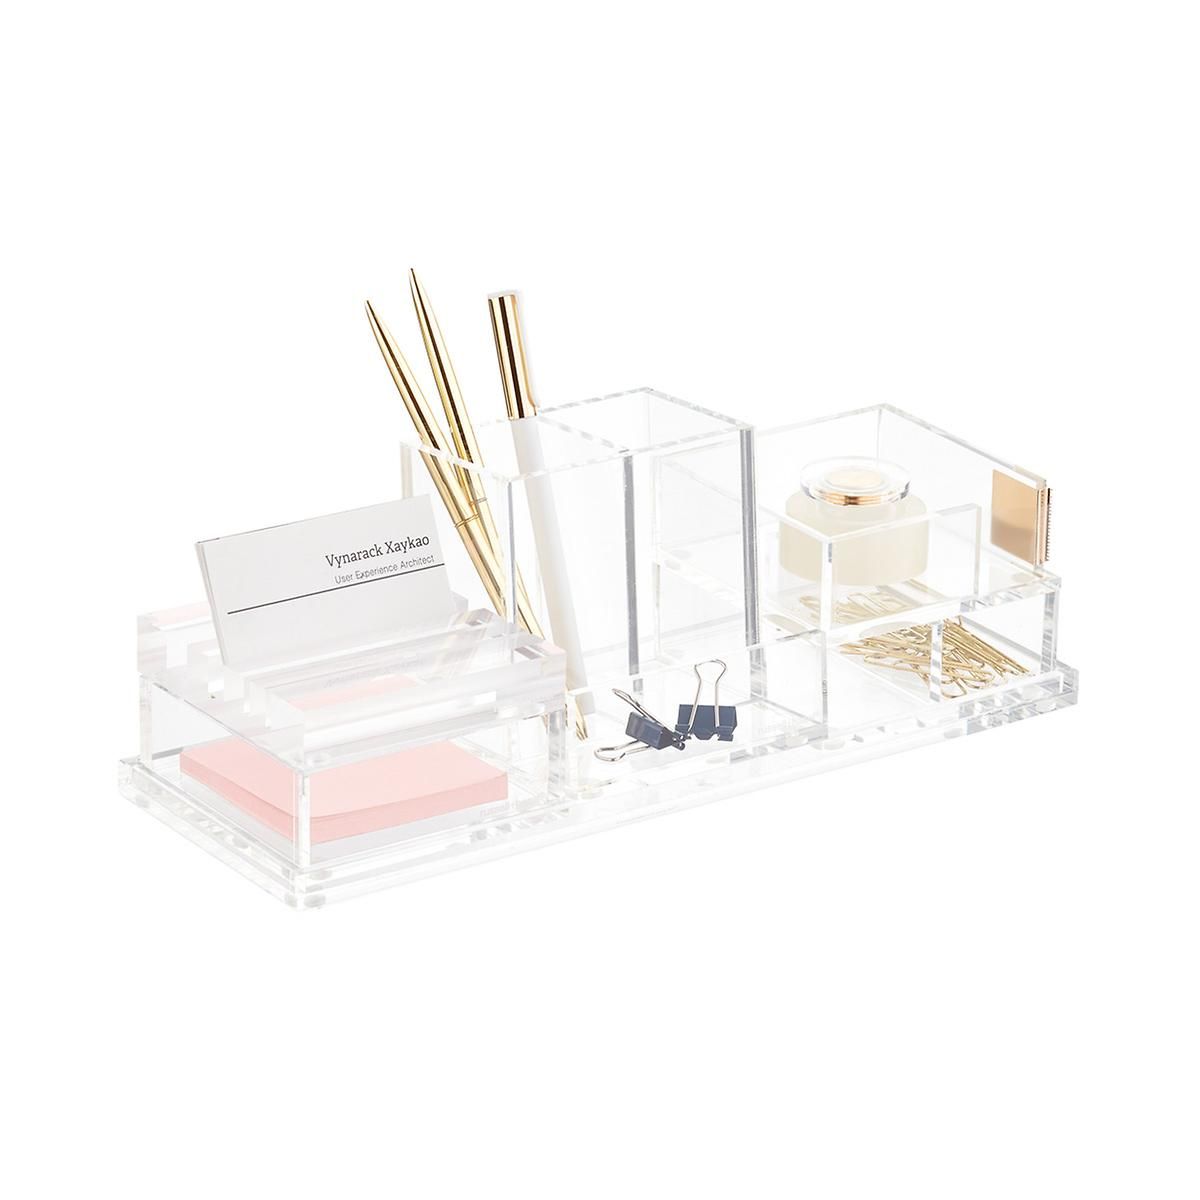 Russell + Hazel Acrylic Bloc Collection System | The Container Store